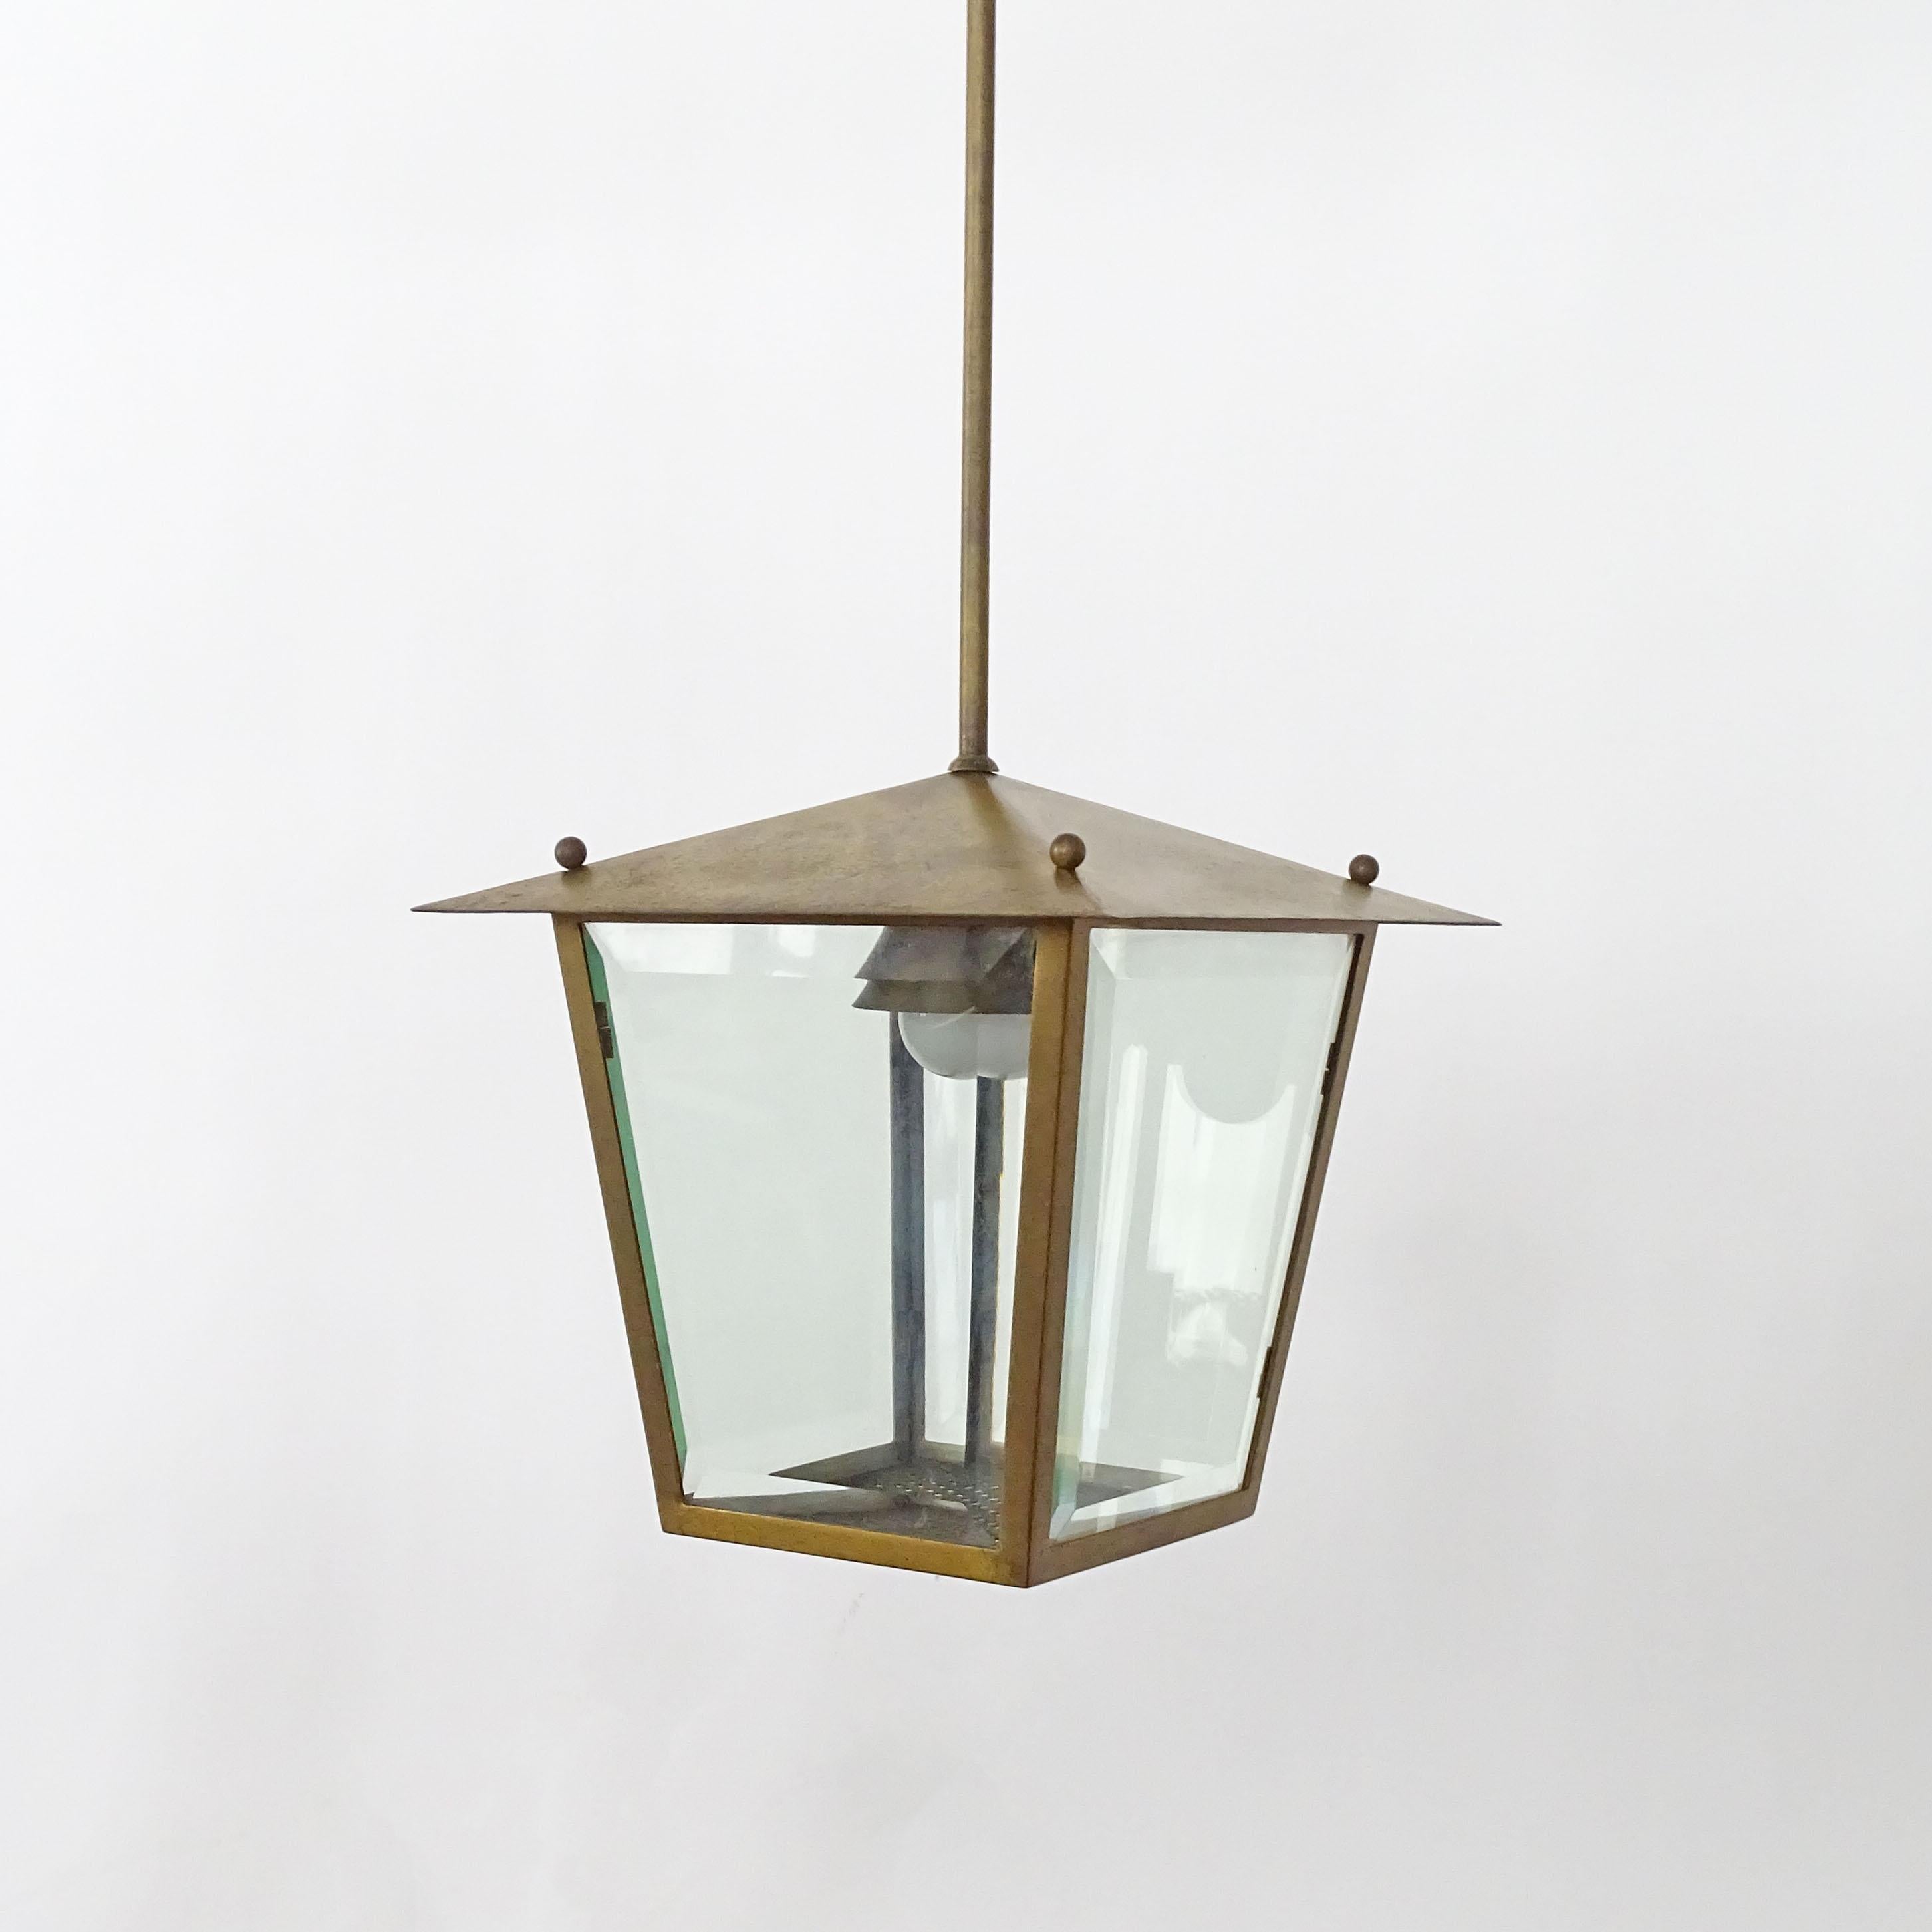 Splendid Italian 1940s Pendant Lamp in Perforated Brass and Cut Glass For Sale 2